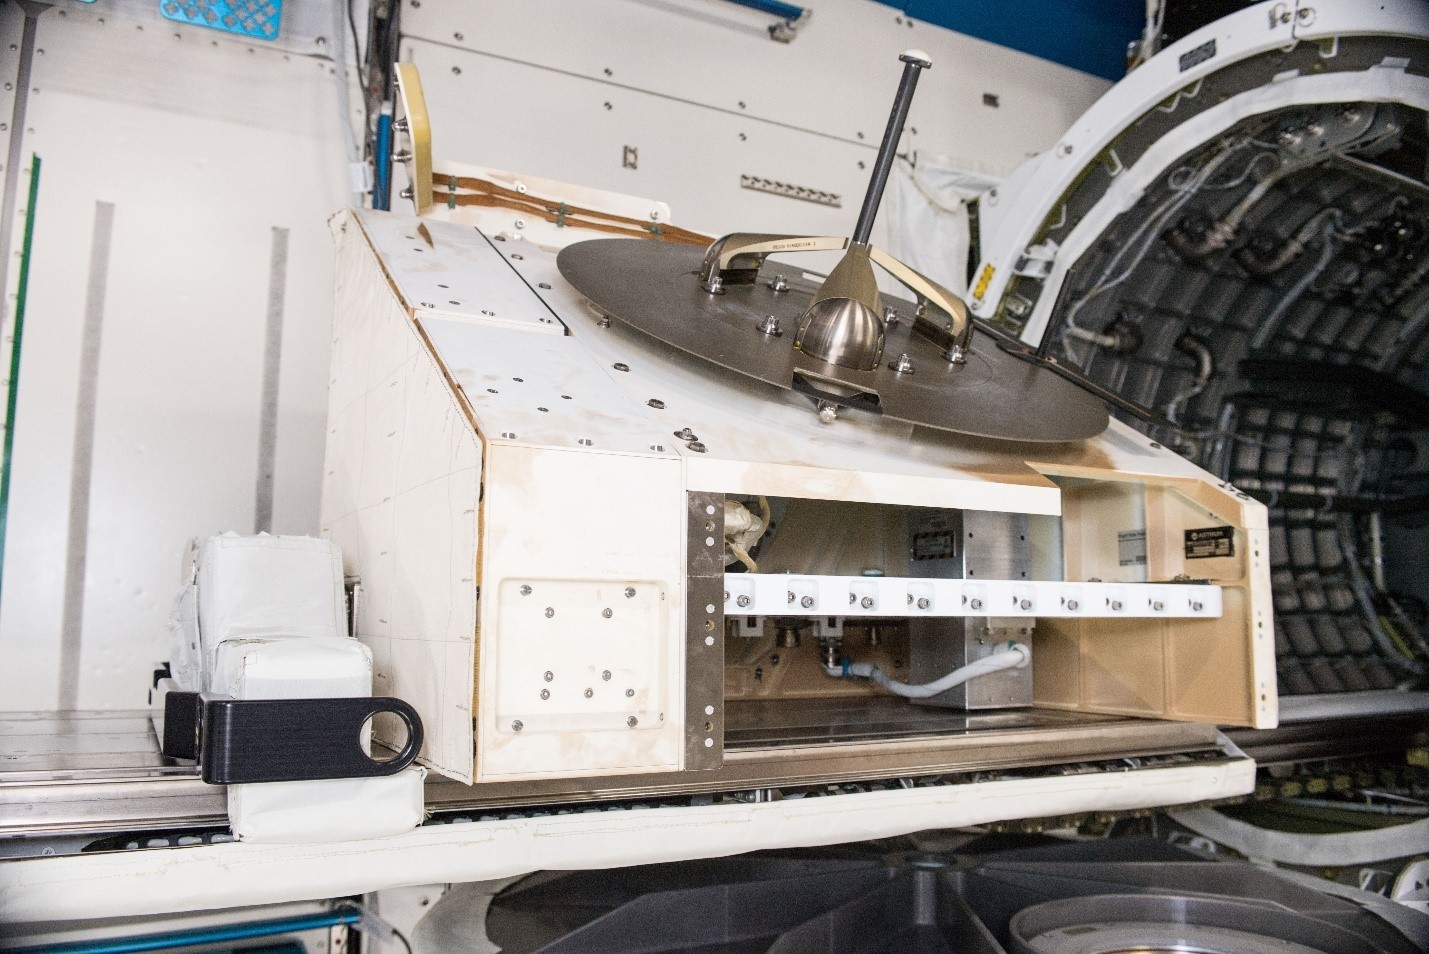 Orbital Sidekick’s ISS-HEIST hyperspectral payload (silver rectangular box, right) integrated into the NanoRacks External Platform and awaiting deployment on the International Space Station. Credit: NanoRacks/NASA